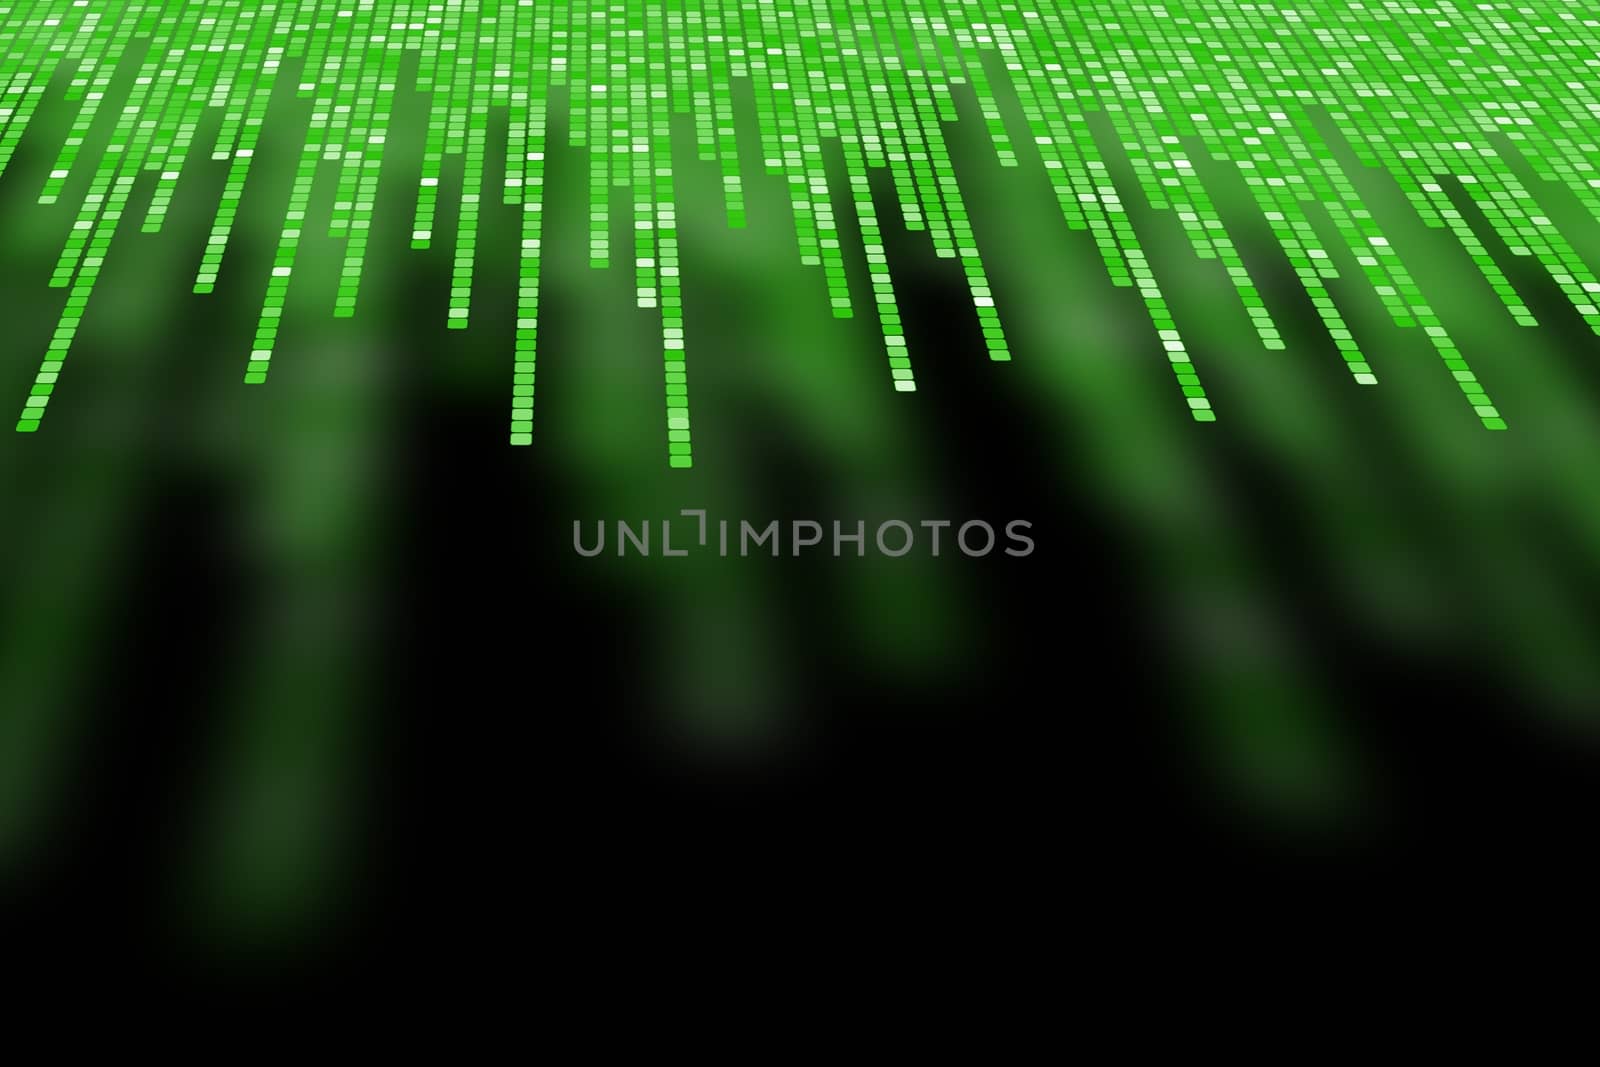 matrix made of green square polkadots on black background  by a3701027